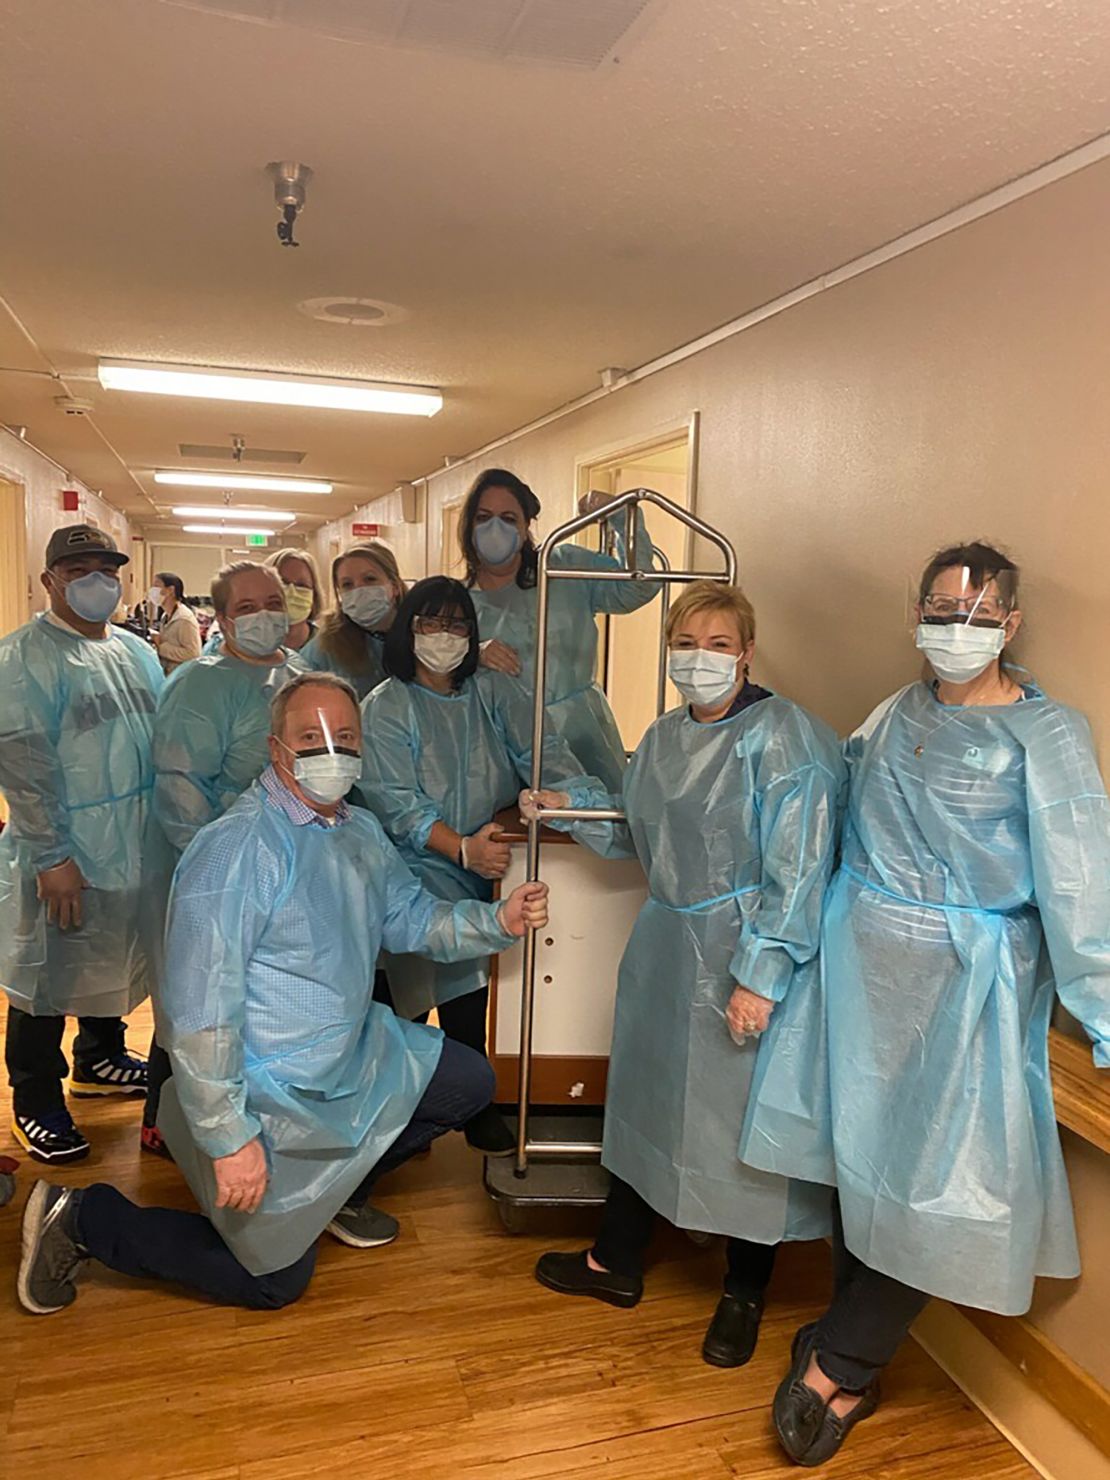 Staff at the Life Care Center in Kirkland, Washington, wear protective equipment after the outbreak was identified.